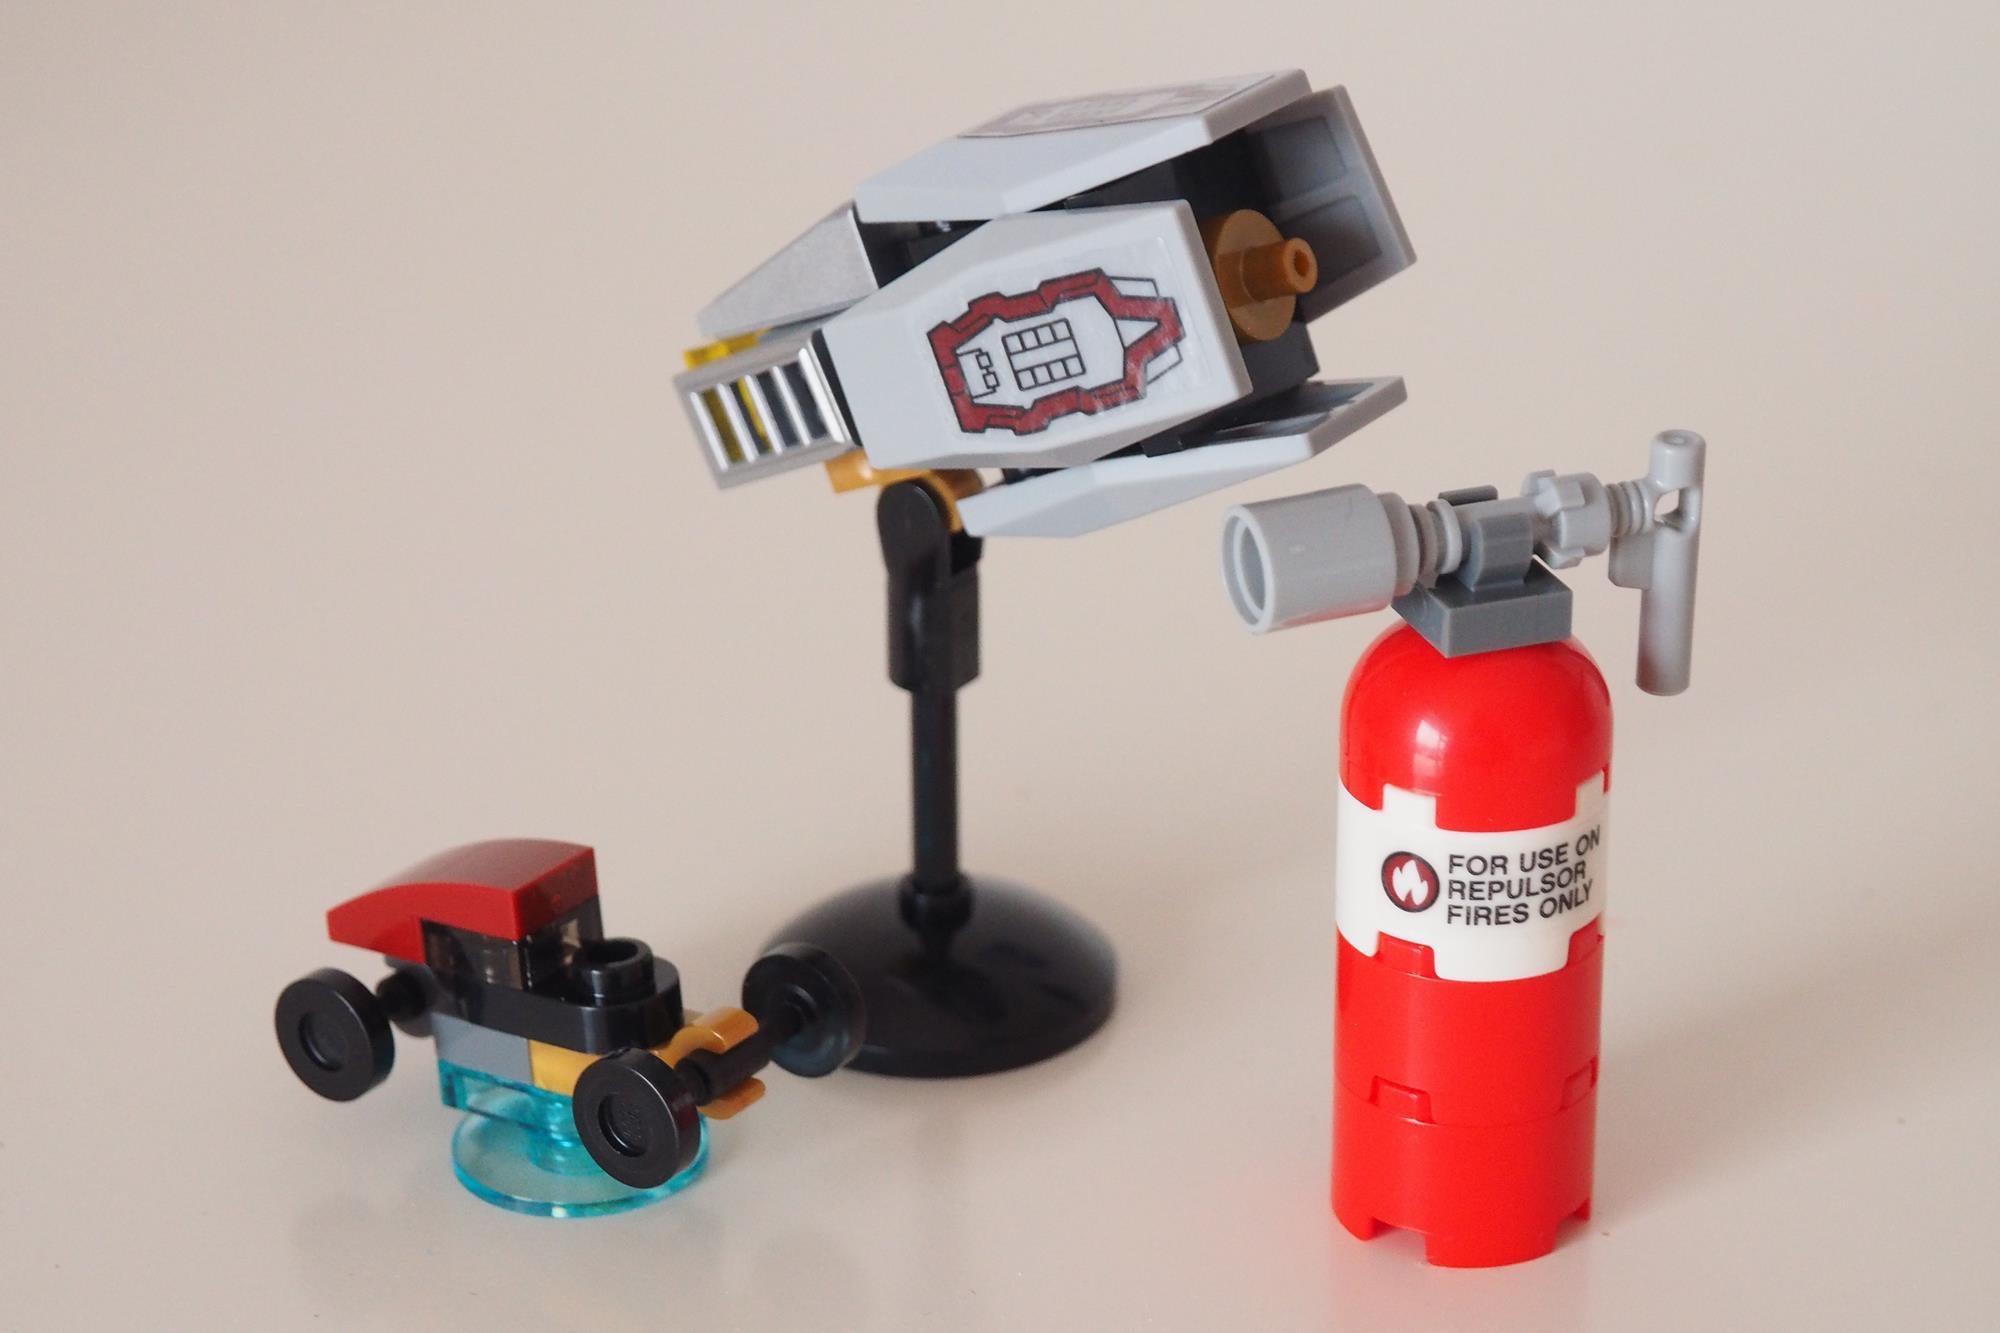 LEGO helmet and fire extinguisher on display.